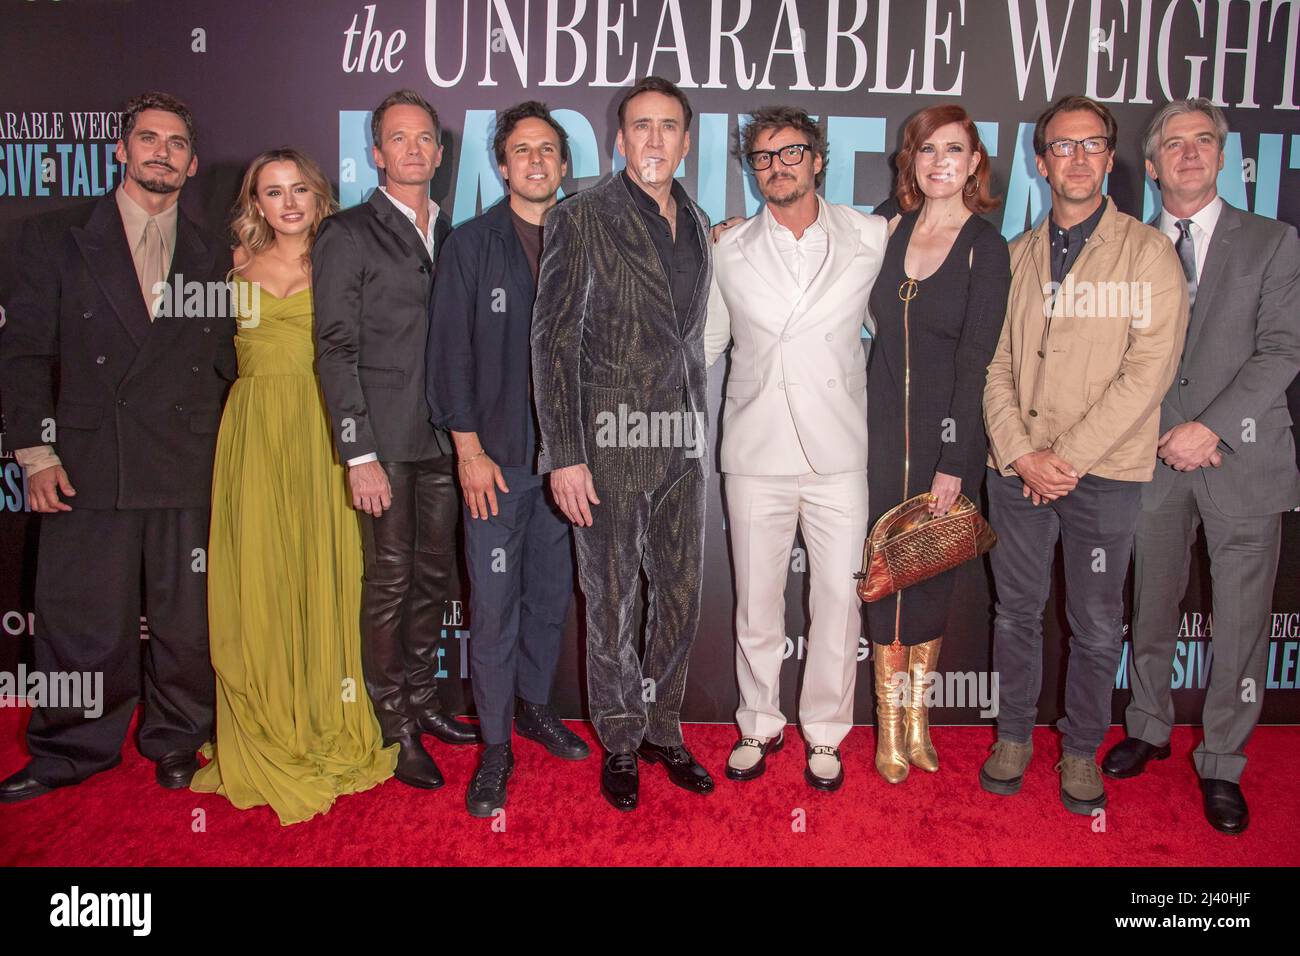 NEW YORK, NEW YORK - APRIL 10: Paco León, Lily Sheen, Neil Patrick Harris, Kevin Turen, Nicolas Cage, Pedro Pascal, Kristin Burr, Kevin Etten and Mike Nilon attend 'The Unbearable Weight Of Massive Talent' New York Screening at Regal Essex Crossing on April 10, 2022 in New York City. Stock Photo